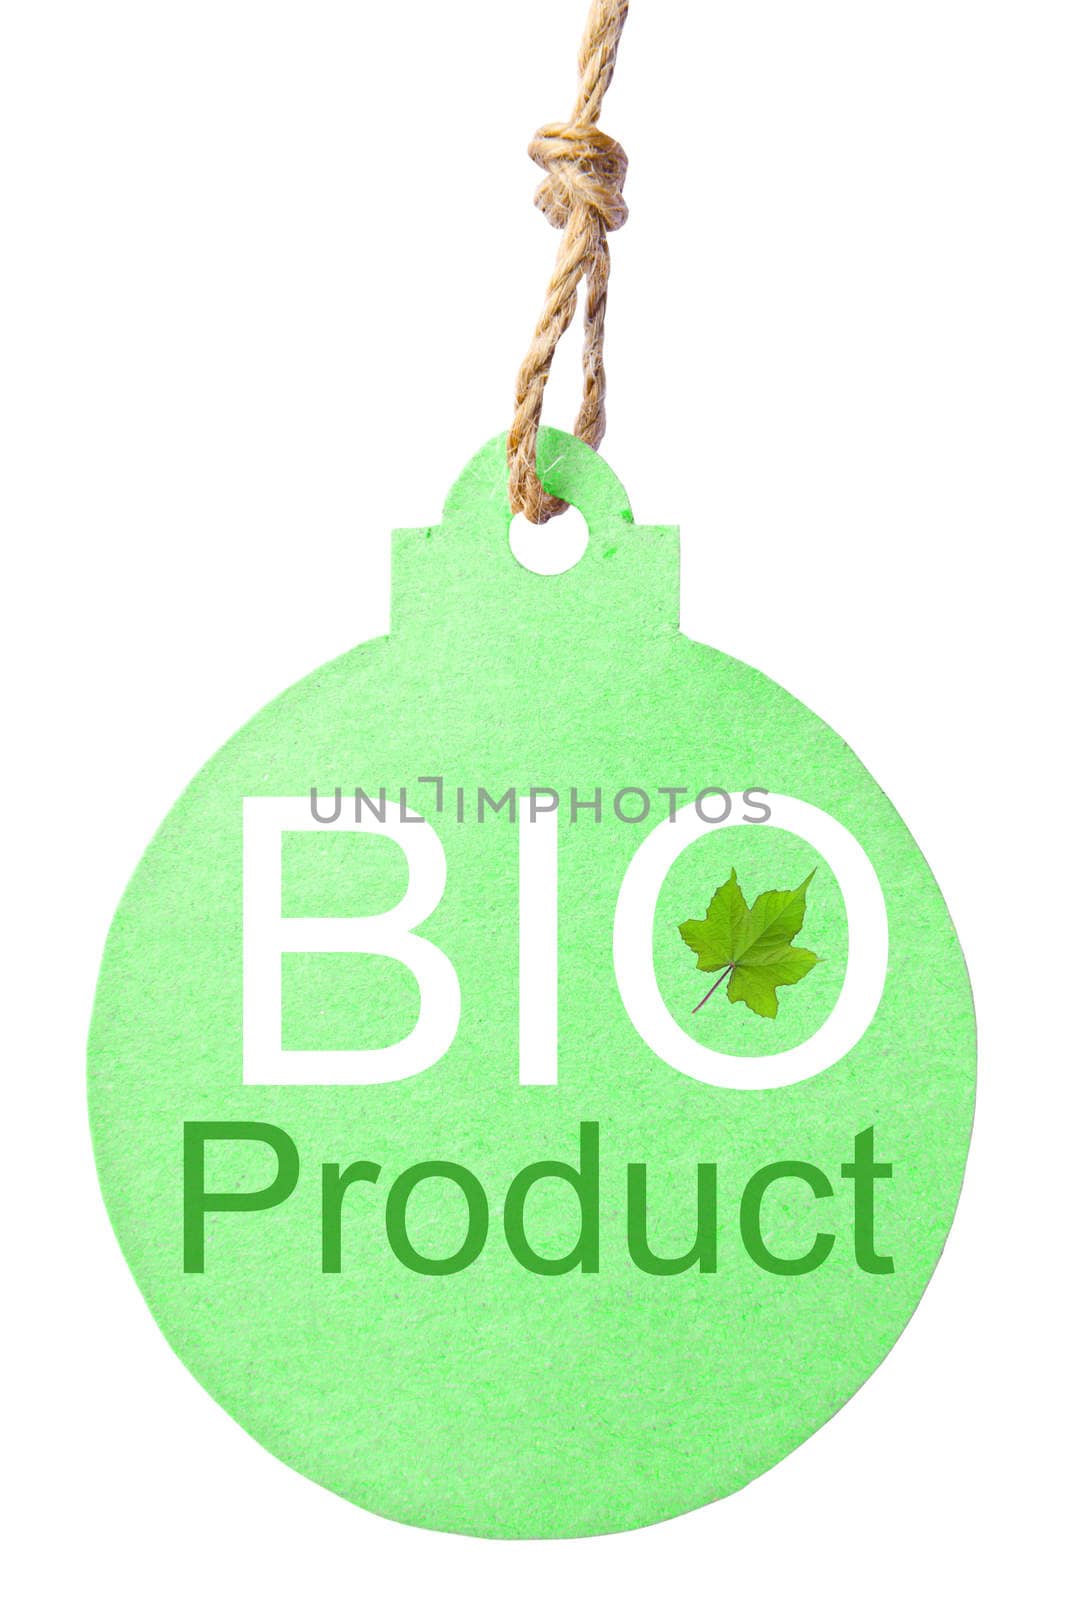 Eco friendly tag, Bio product. Clipping path